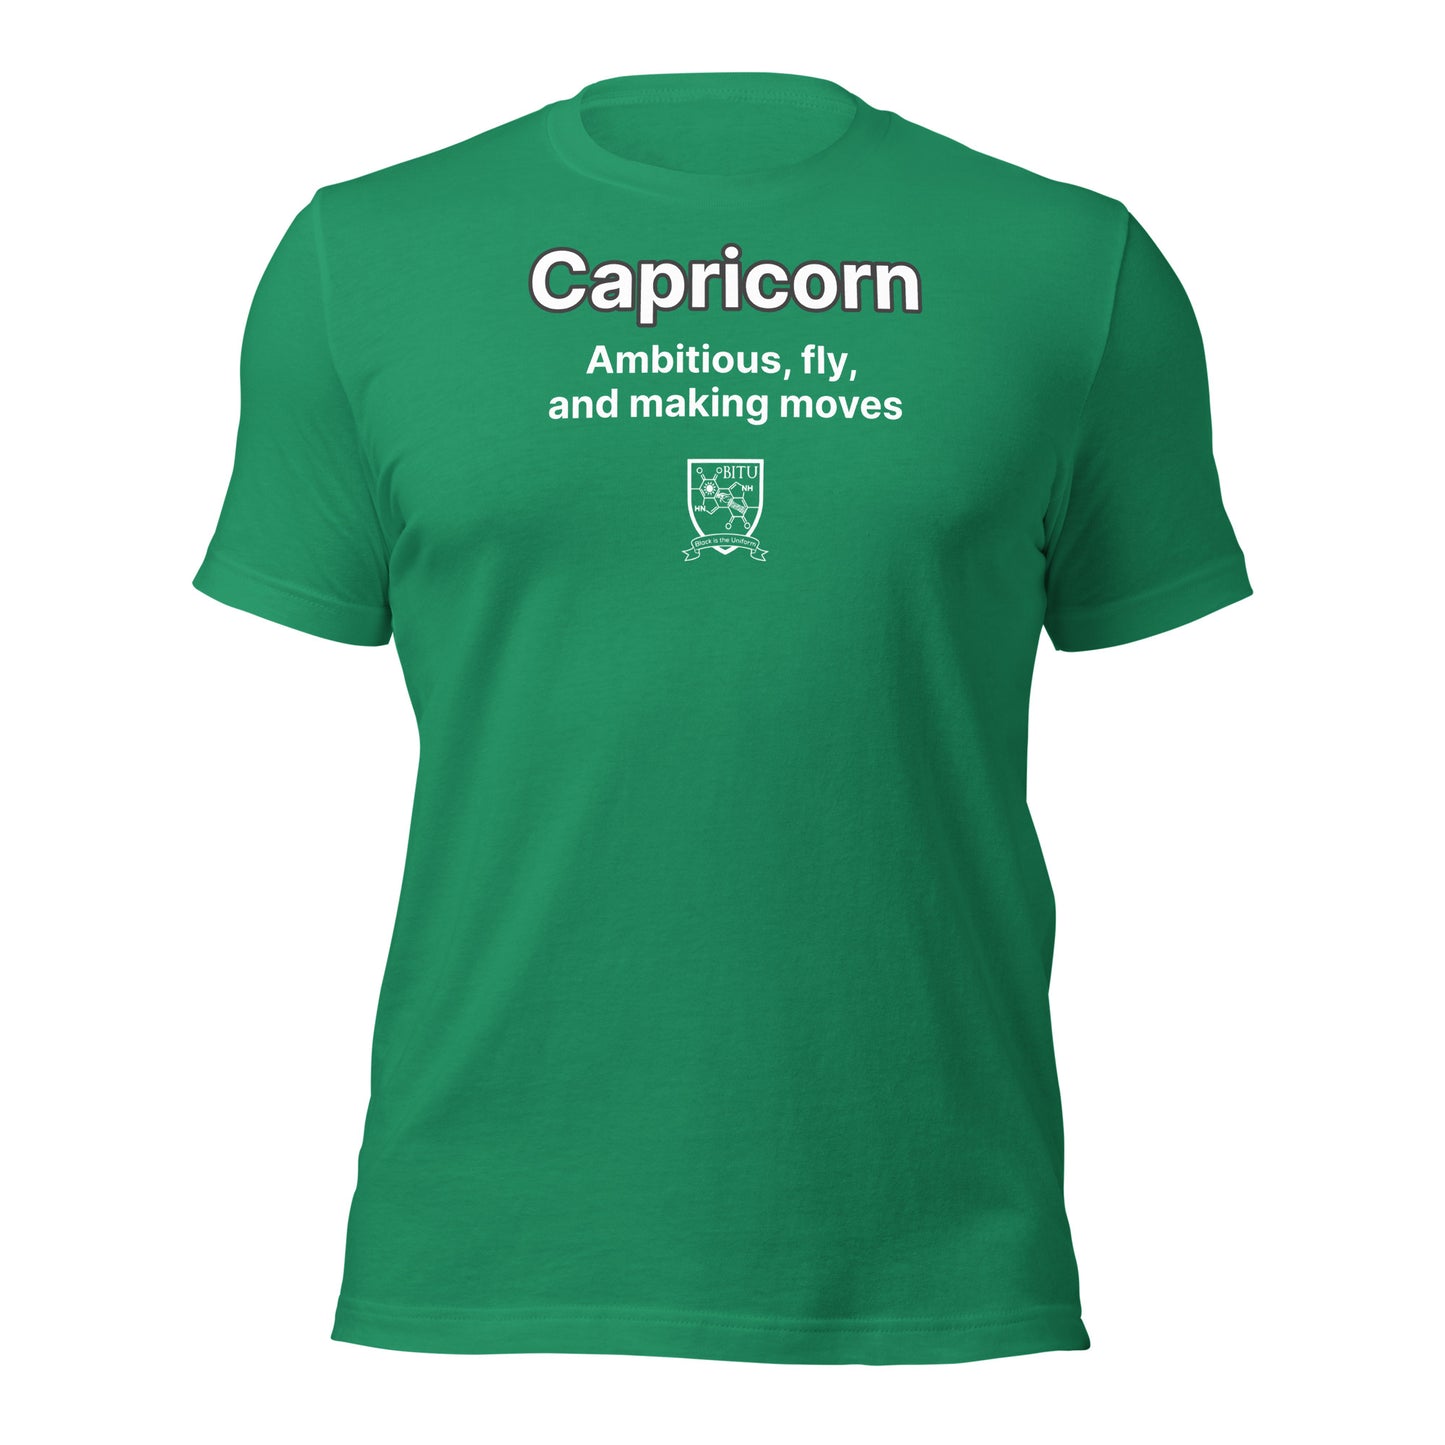 Capricorn - Ambitious, fly, and making moves